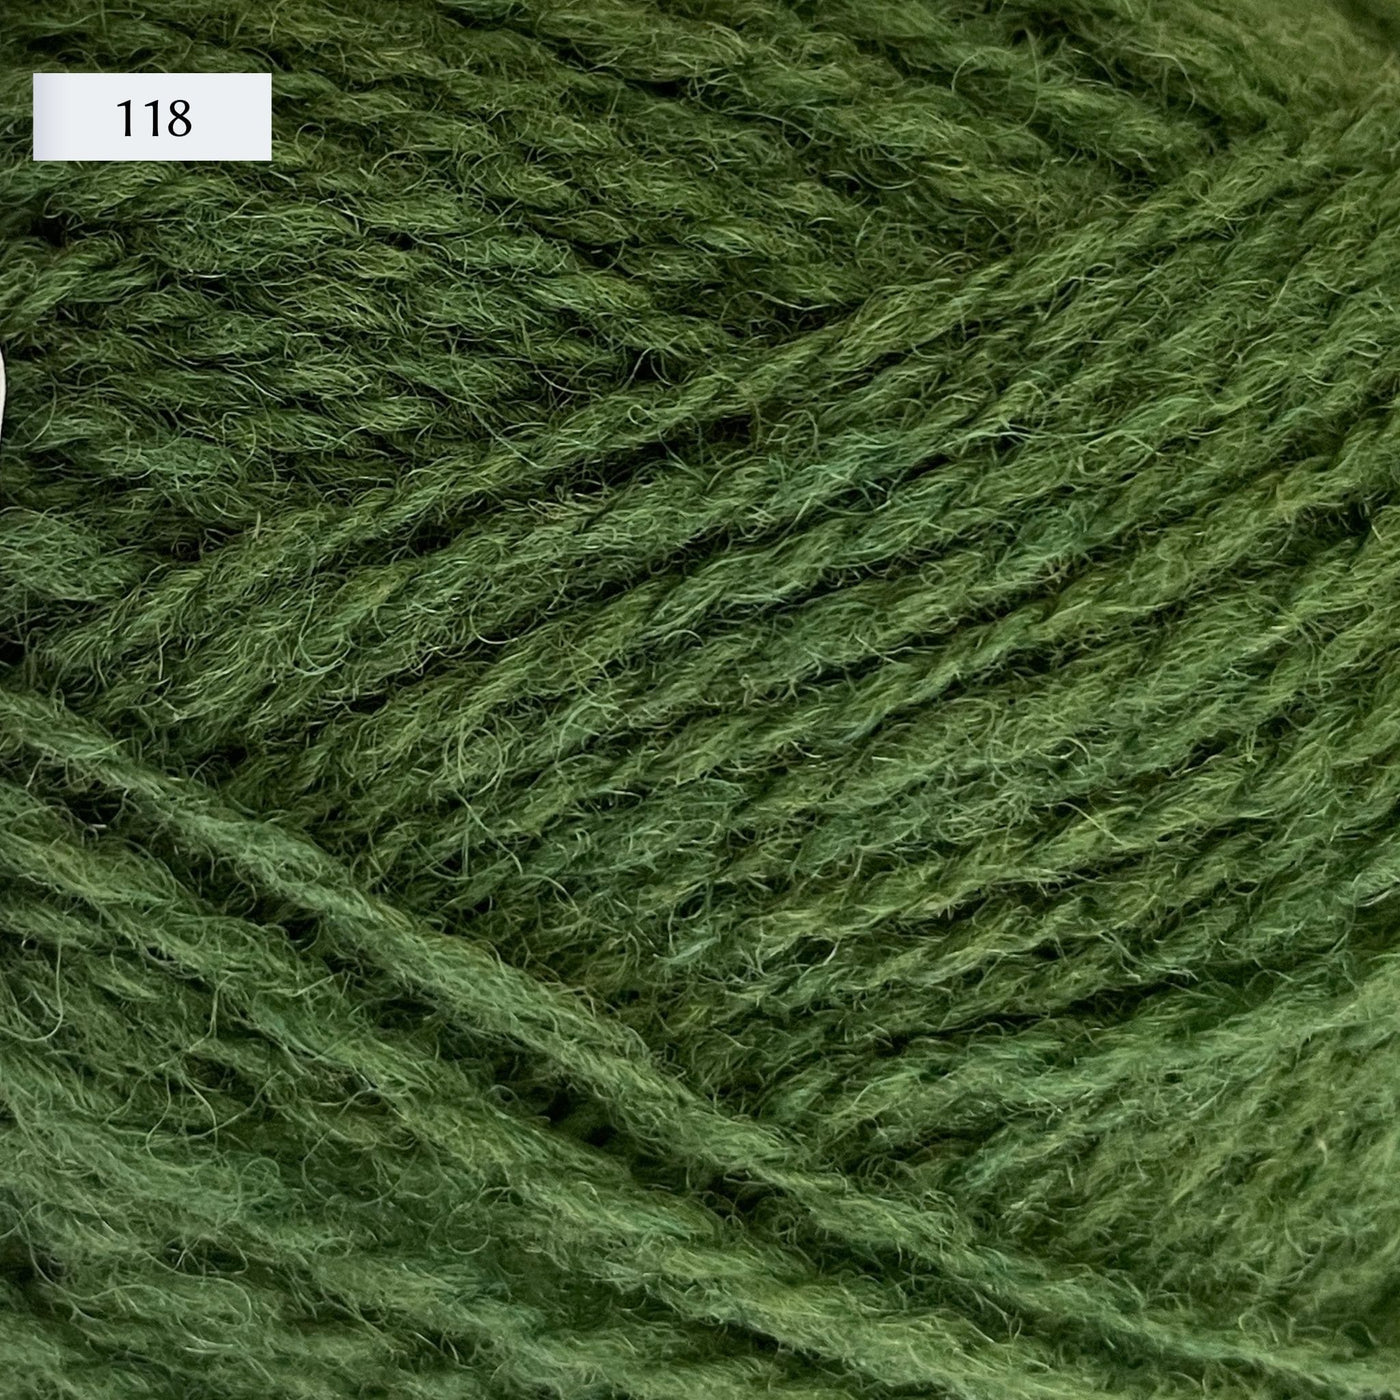 Jamieson & Smith 2ply Jumper Weight, light fingering weight yarn, in color 118, a mid-tone grass green